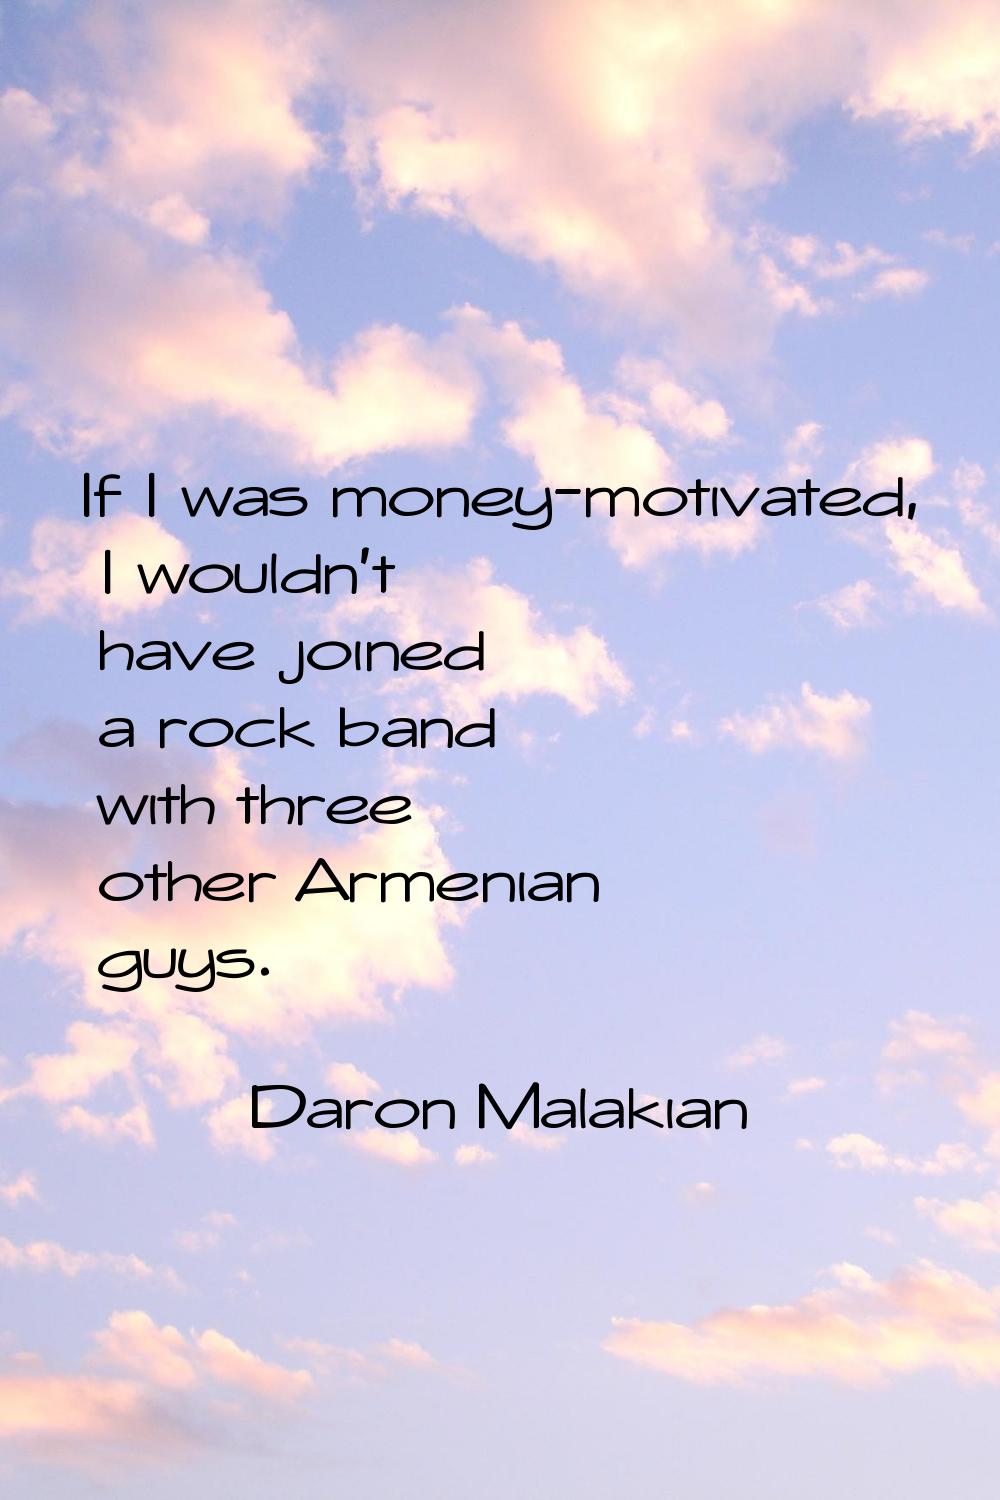 If I was money-motivated, I wouldn't have joined a rock band with three other Armenian guys.